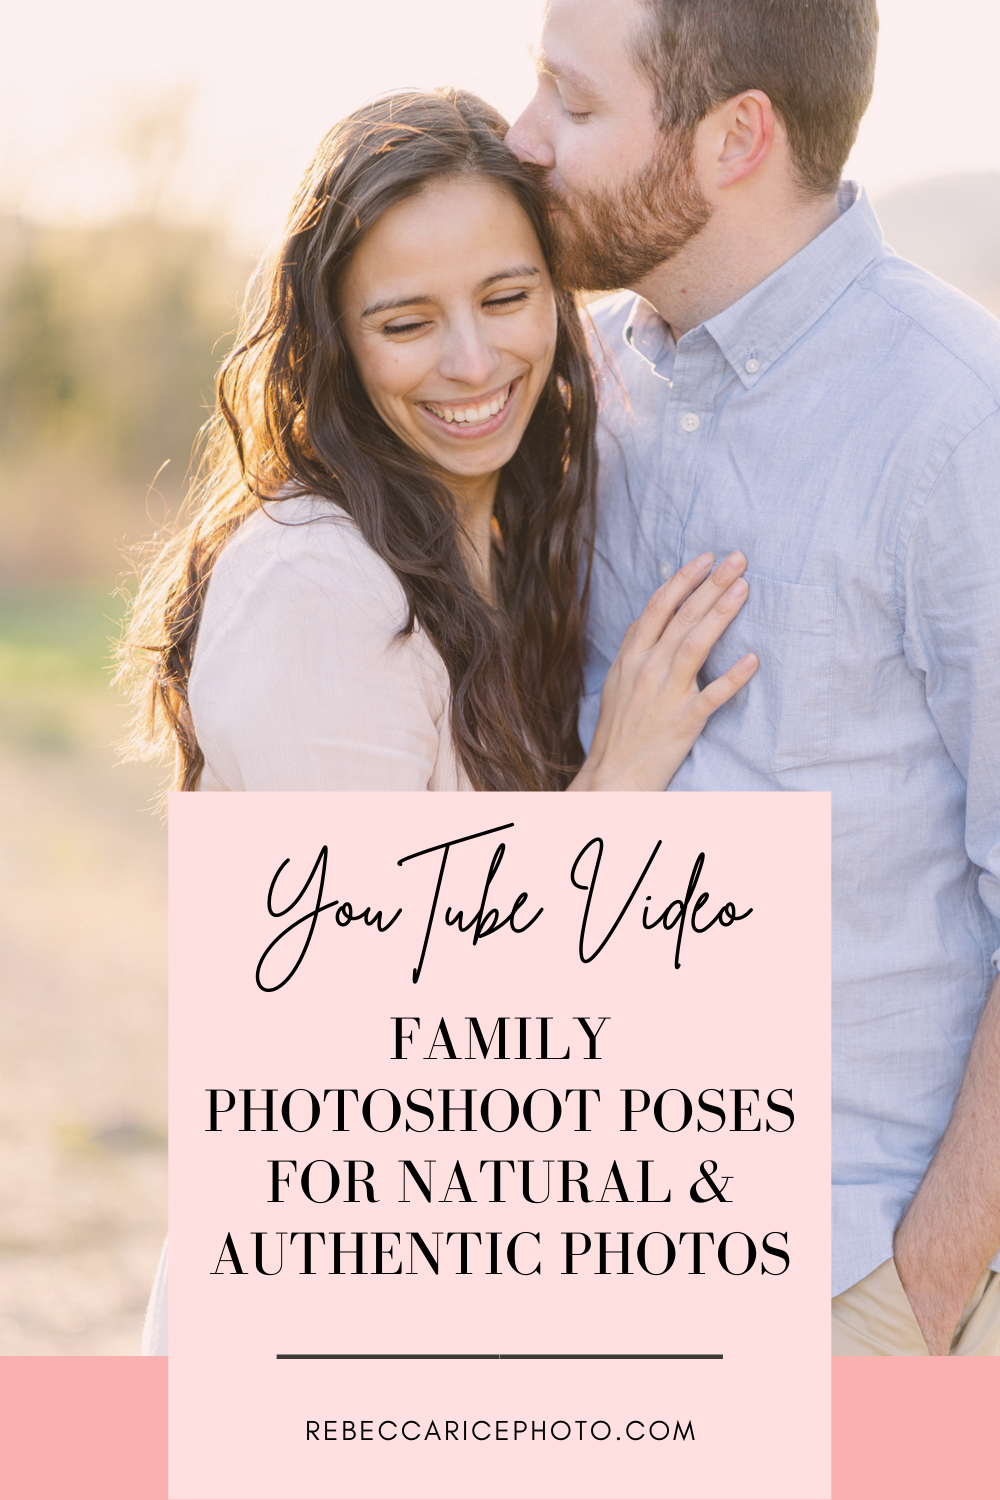 Family Photoshoot Poses For Natural & Authentic Photos